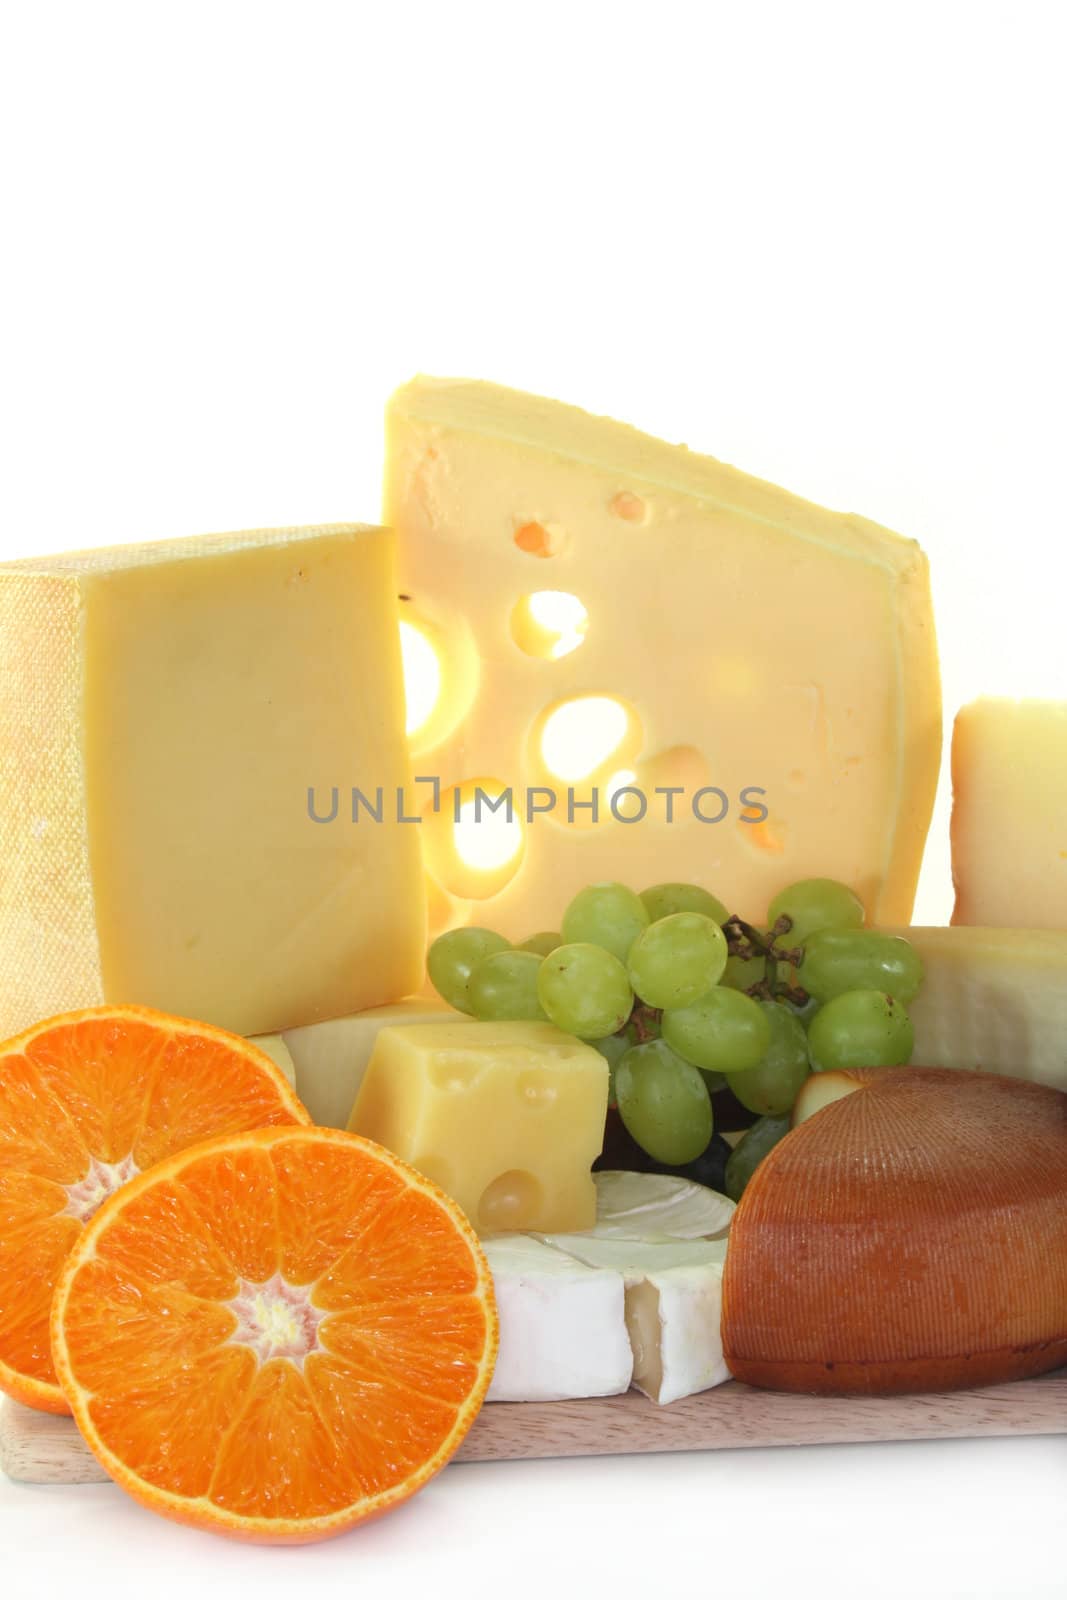 Cheese by silencefoto